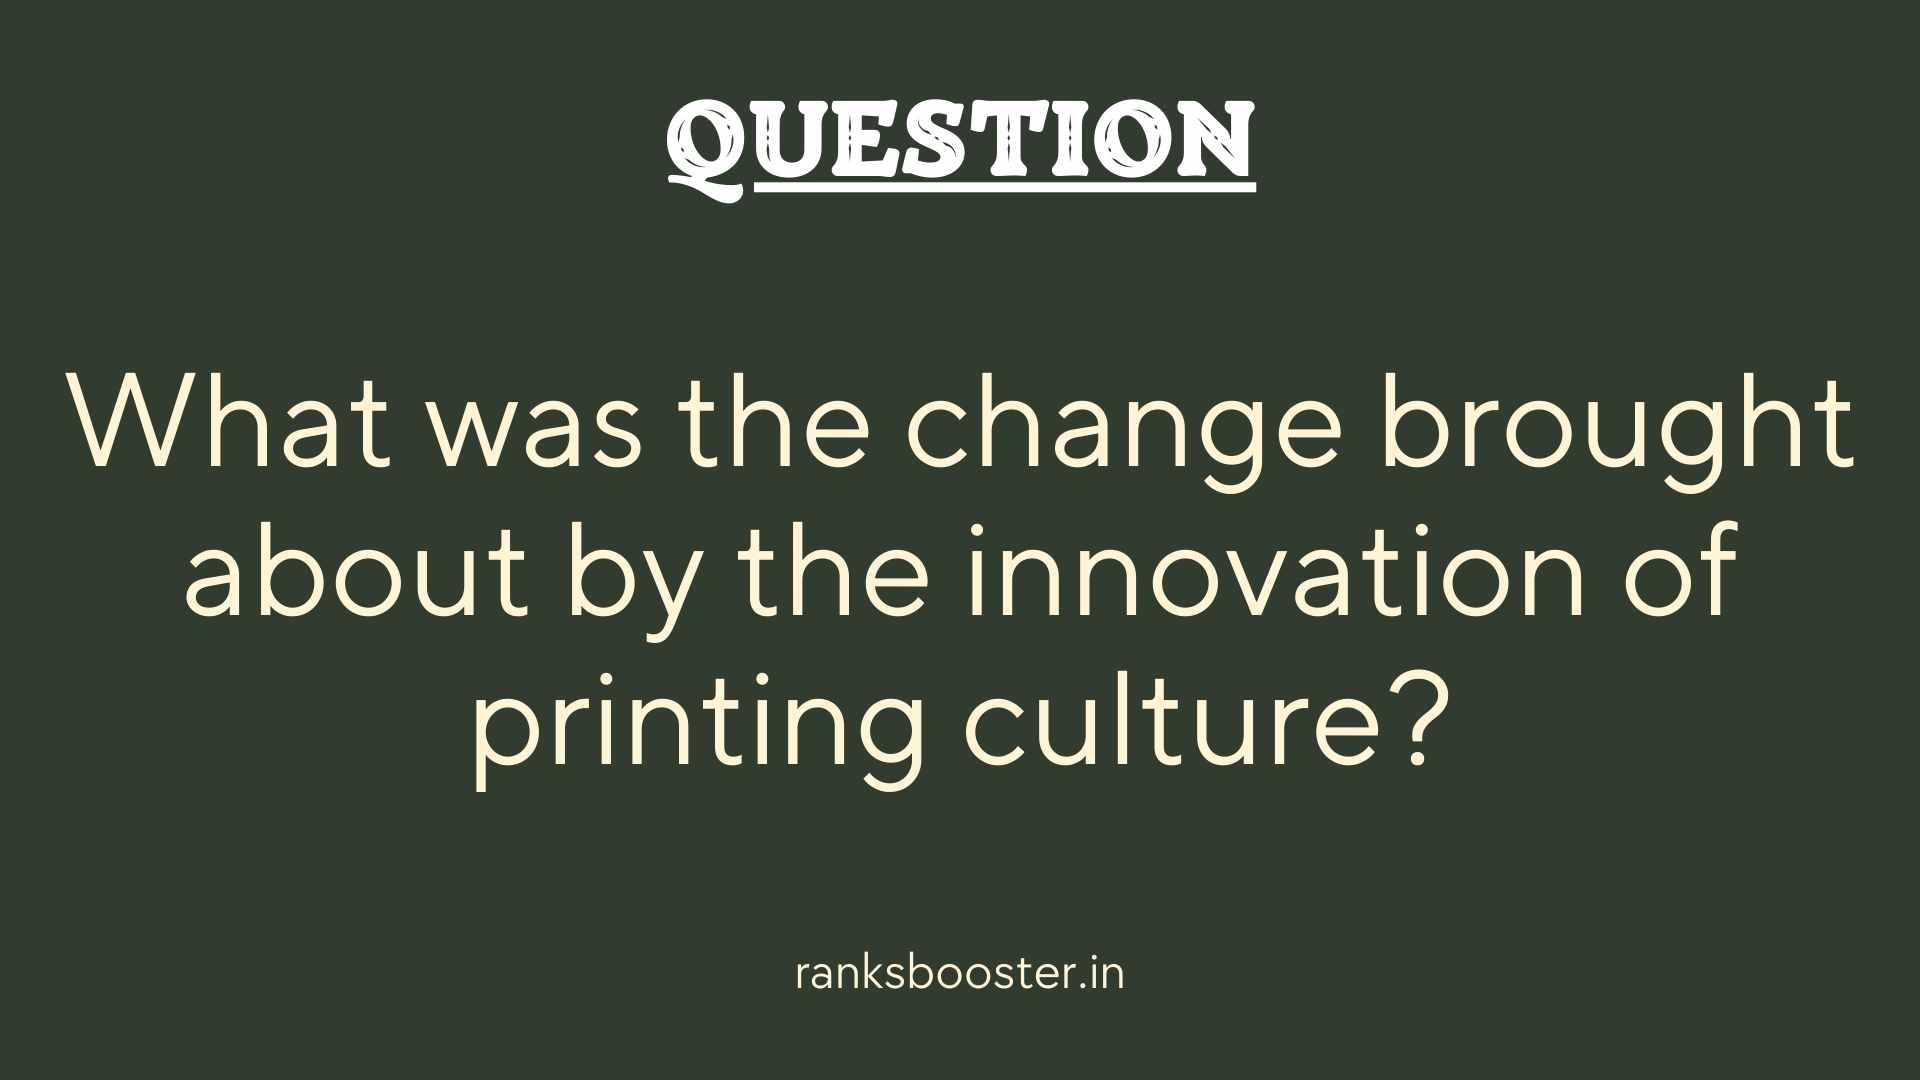 Question: What was the change brought about by the innovation of printing culture?